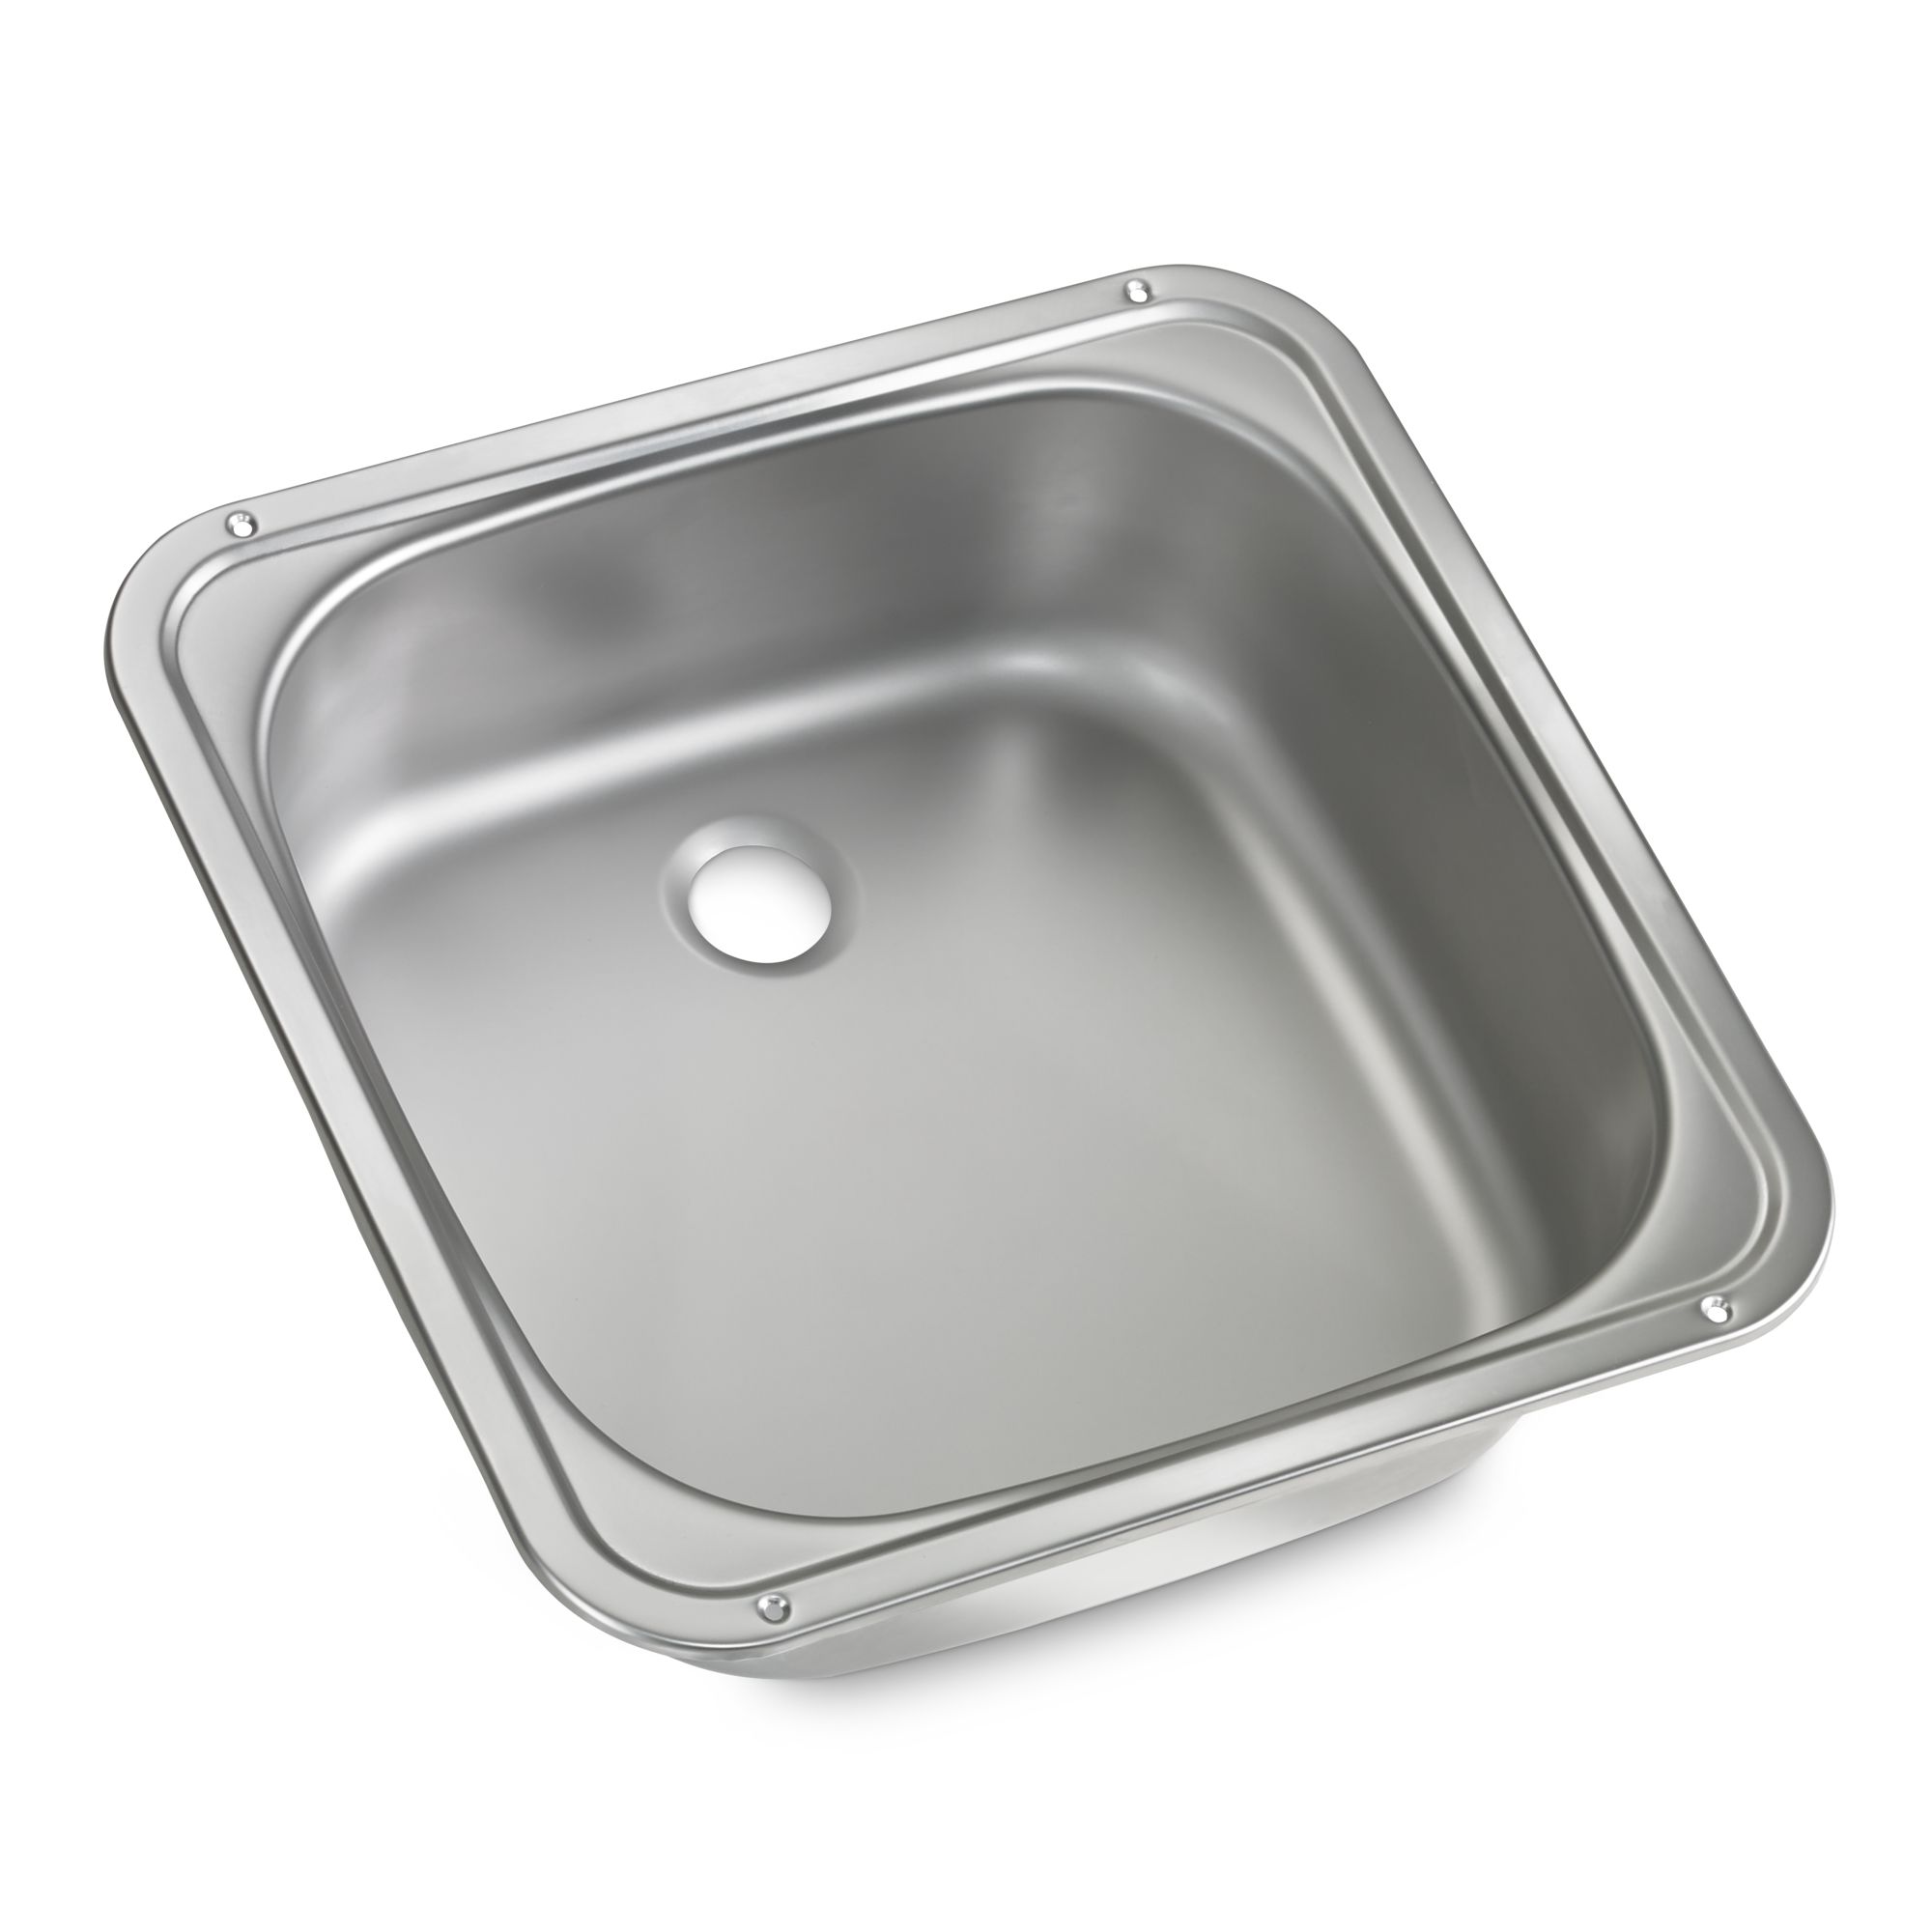 Dometic VA 910 stainless steel sink/wash basin, 370 x 370 mm